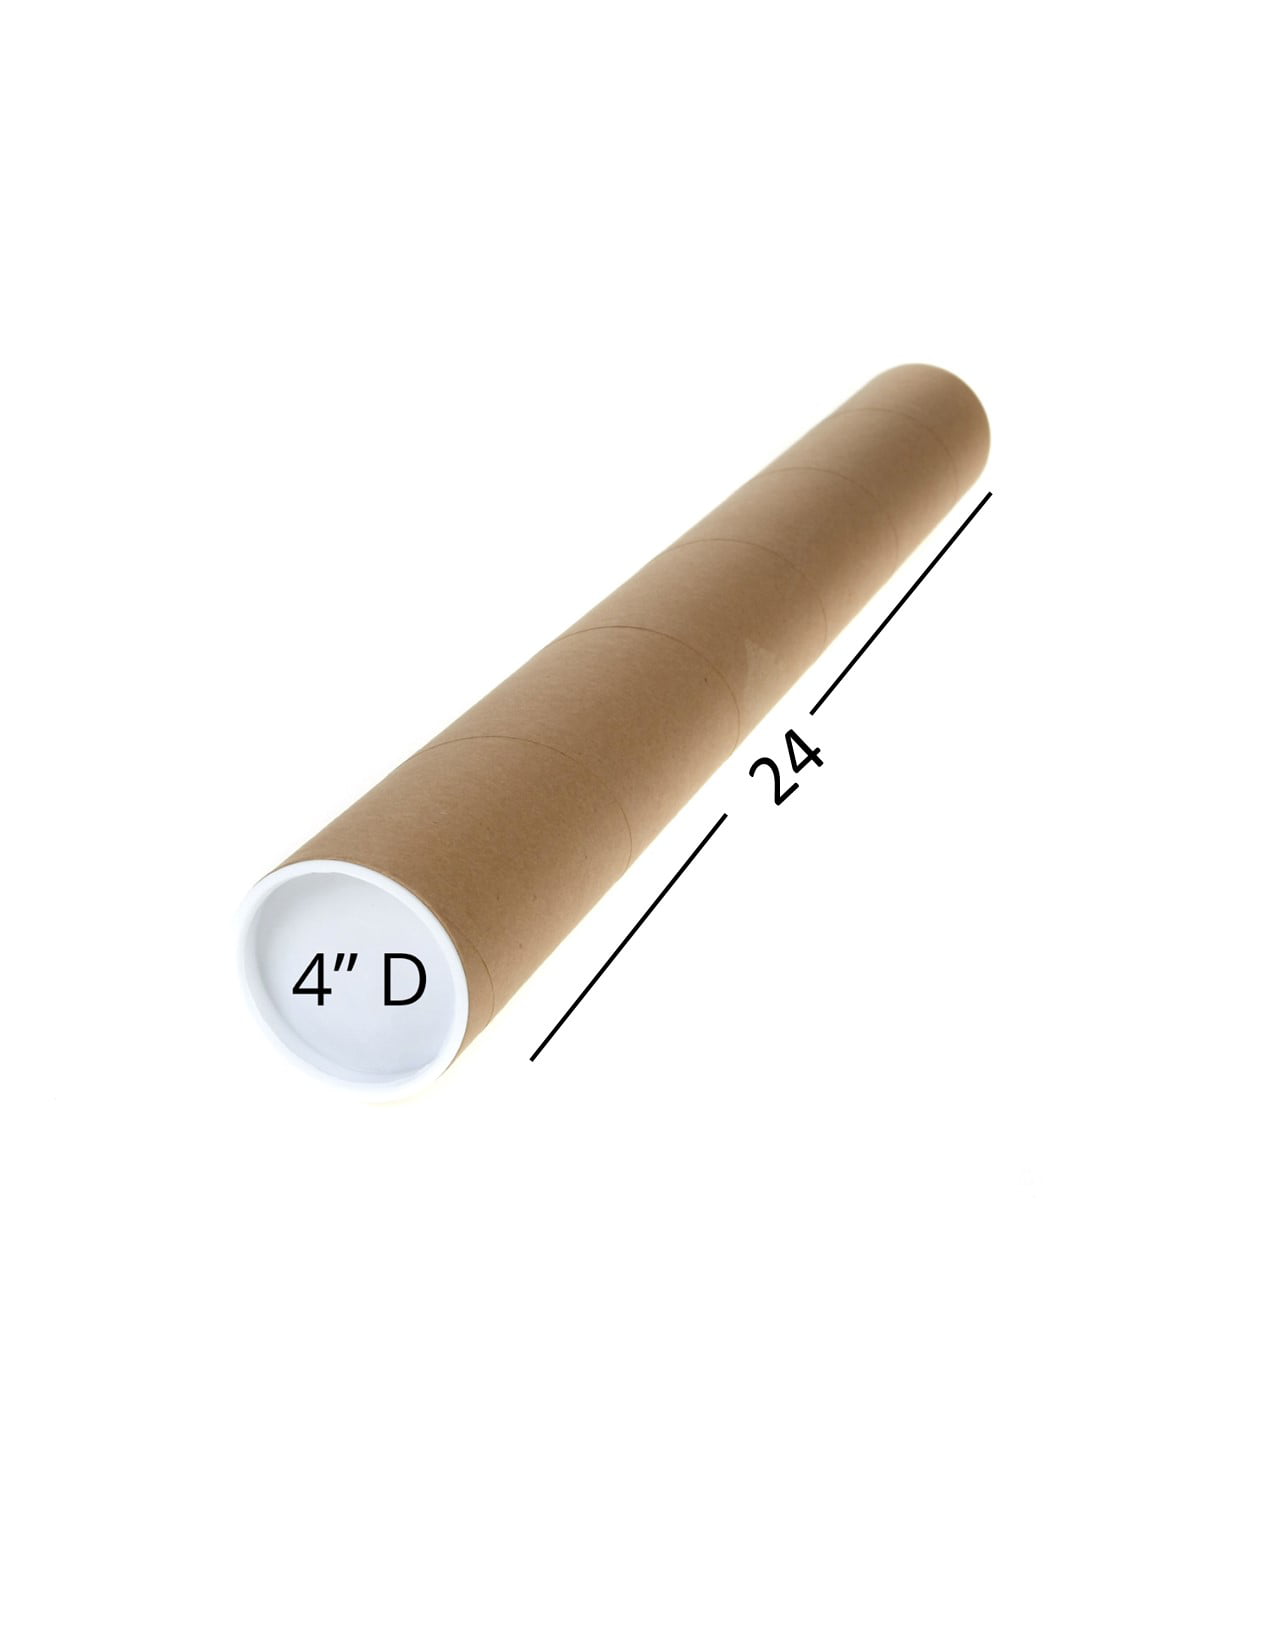 Tubeequeen Kraft Mailing Tubes with End Caps - Art Shipping Tubes 2-Inch x 24-Inch L, 6 Pack, Women's, Brown